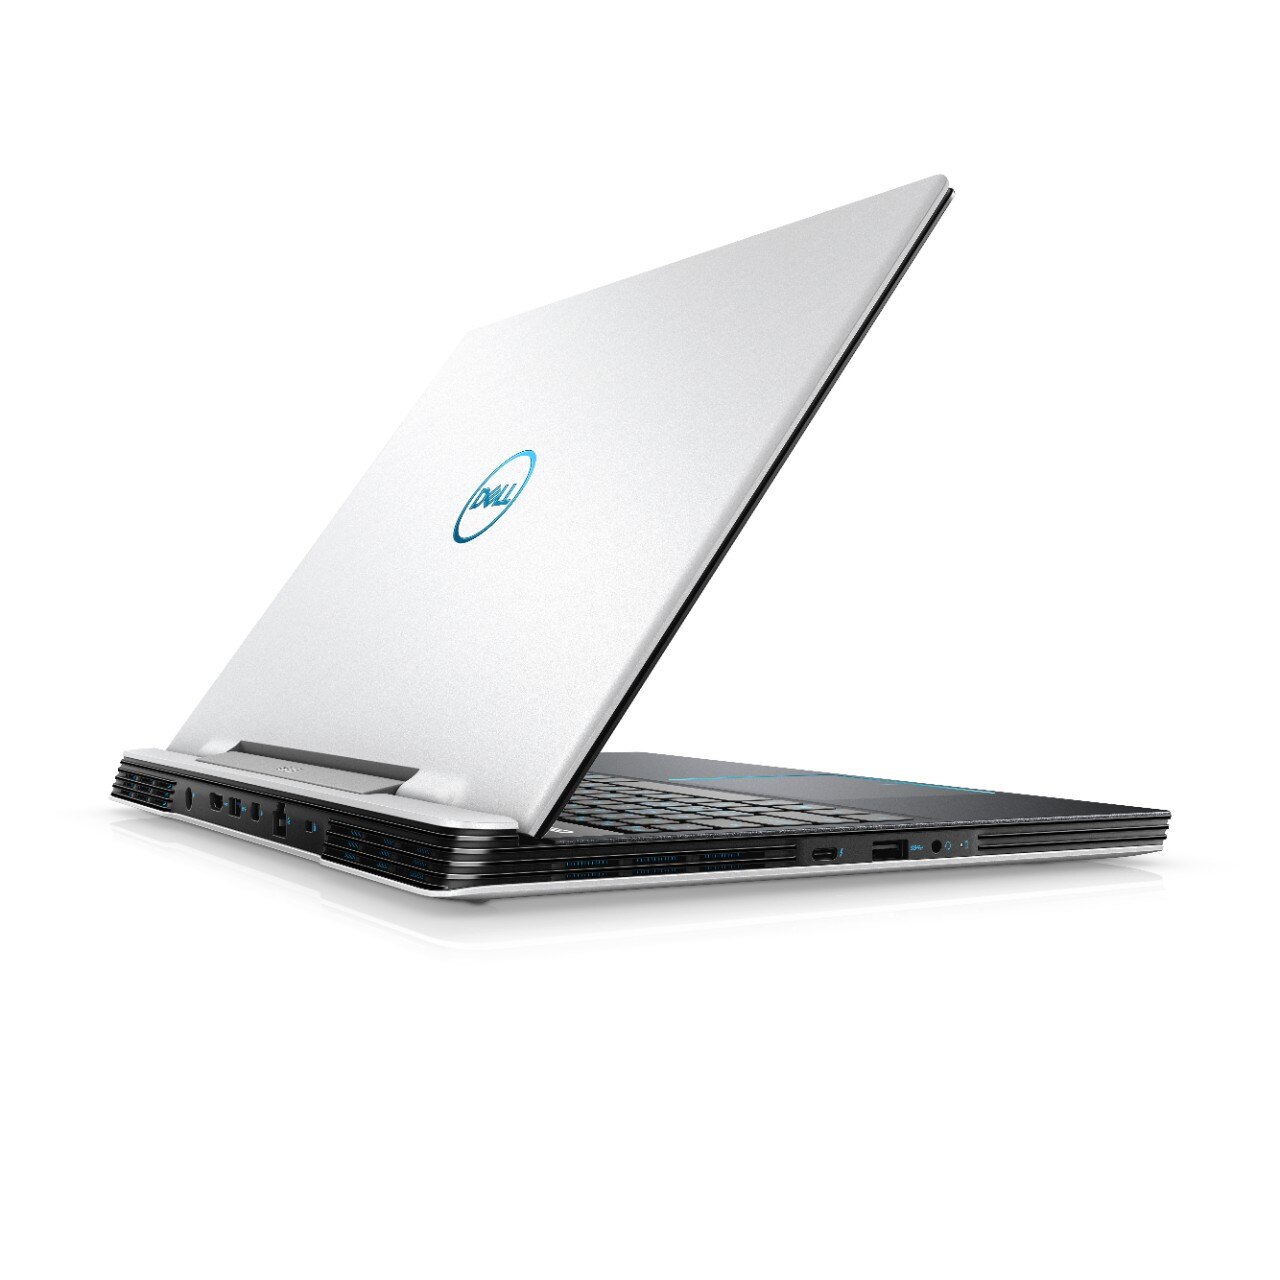 DELL G-SERIES 15 5590 GAMING LAPTOP